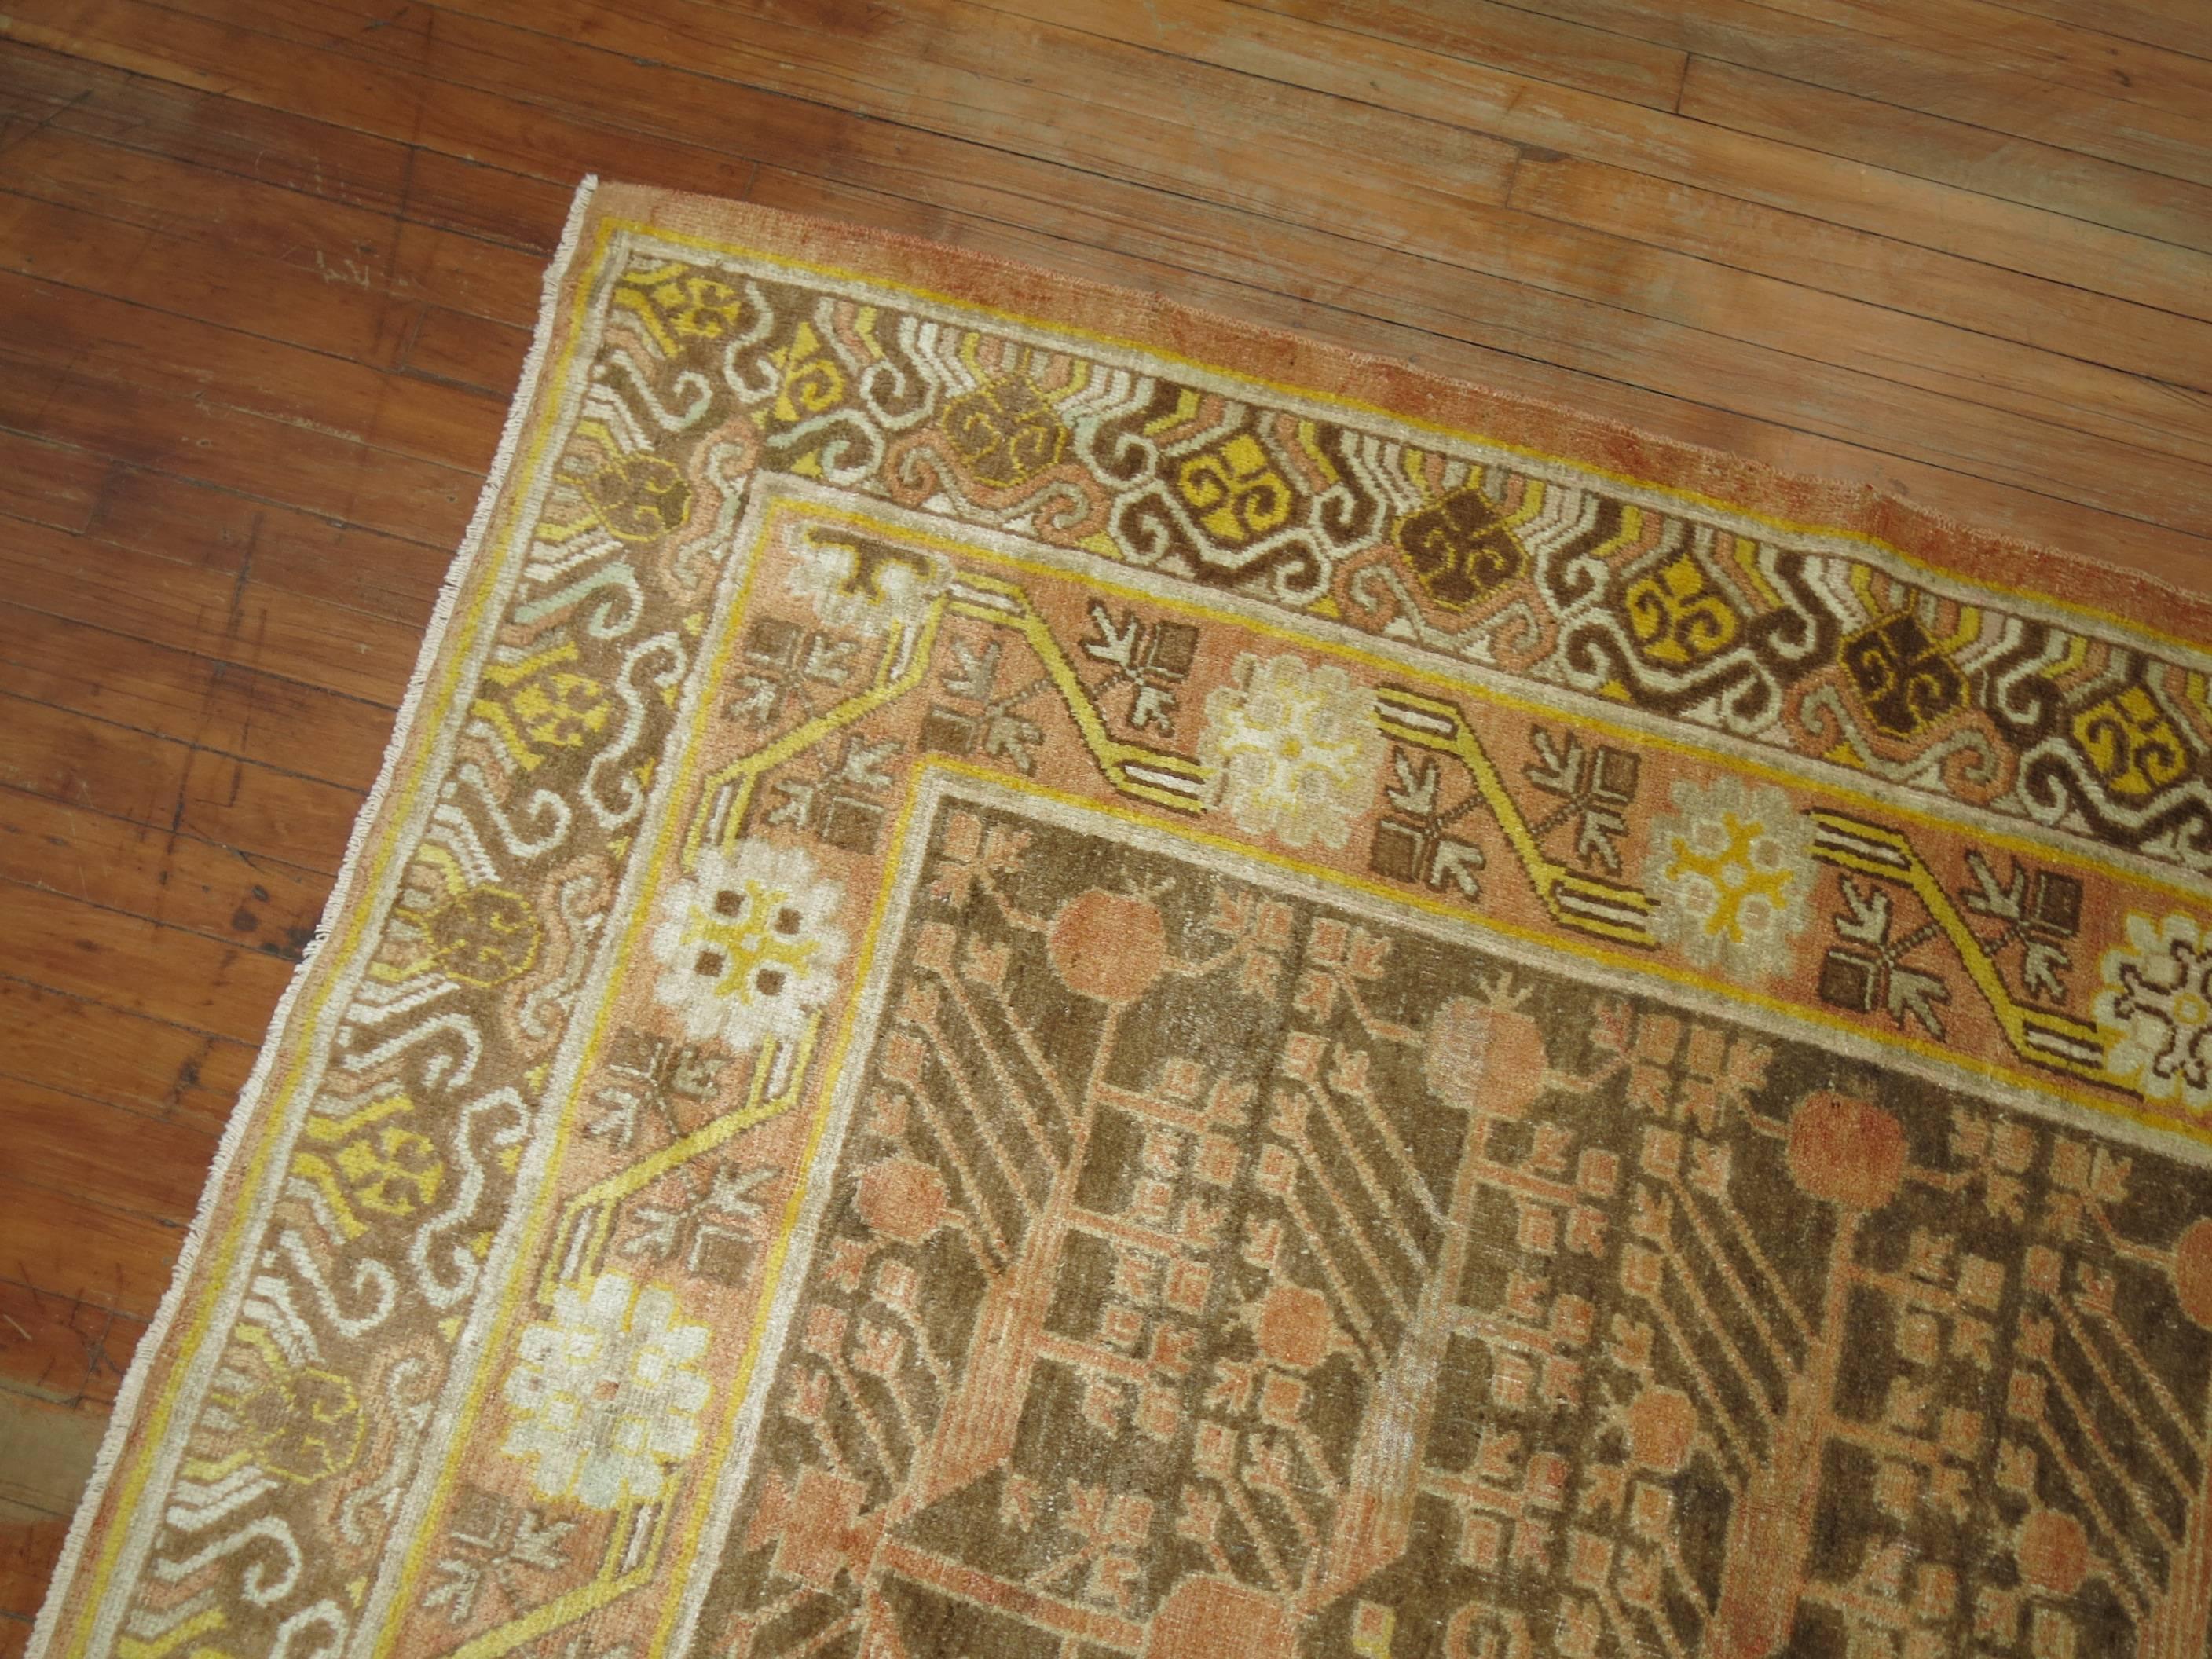 Wool 20th Century Gallery Size Brown Yellow Khotan Pomegranate Design Rug In Excellent Condition For Sale In New York, NY